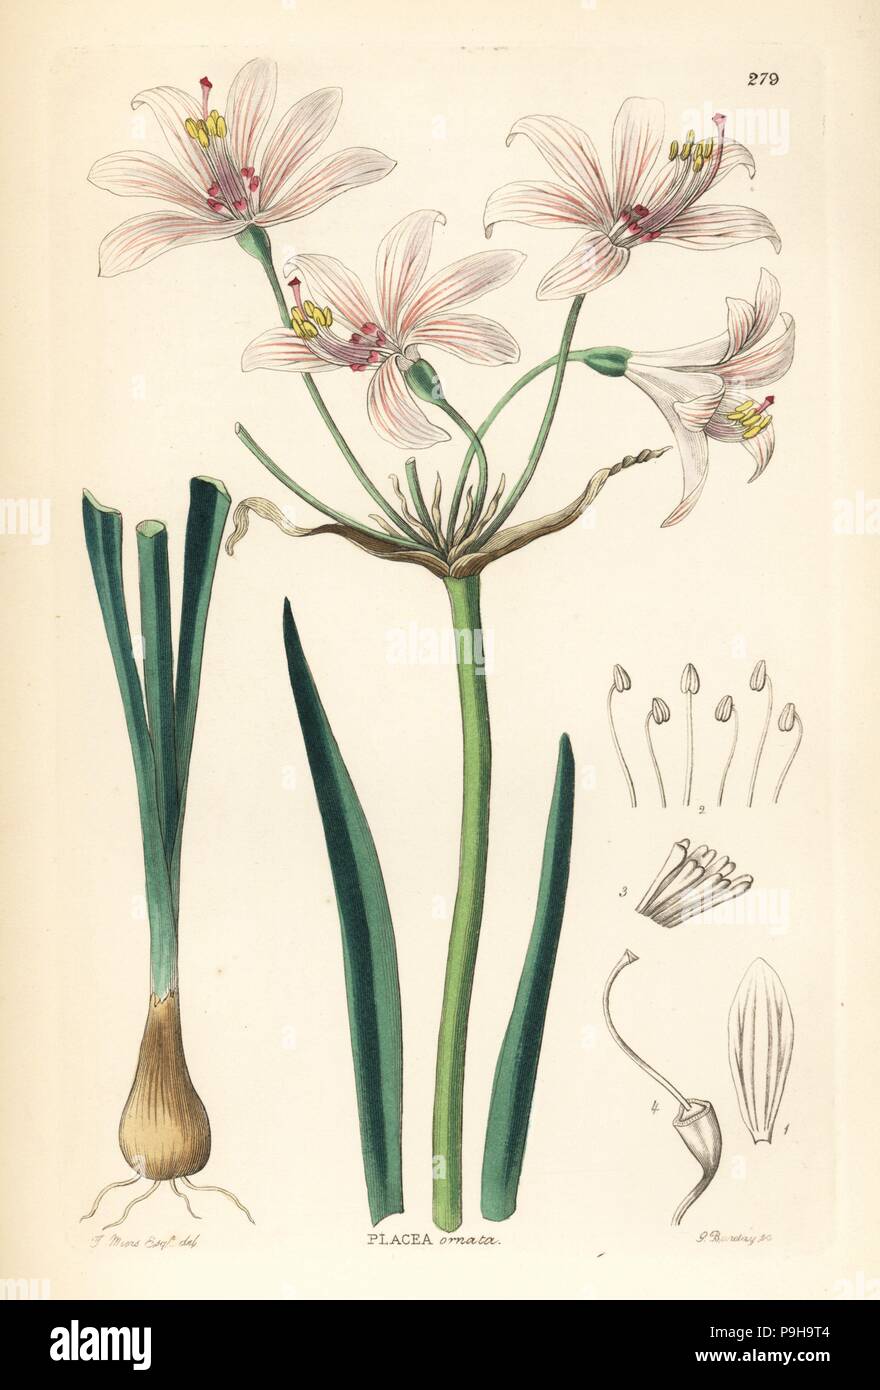 Gay-flowered placea, Placea ornata. Handcoloured copperplate engraving by G. Barclay after G. Miers from John Lindley and Robert Sweet's Ornamental Flower Garden and Shrubbery, G. Willis, London, 1854. Stock Photo